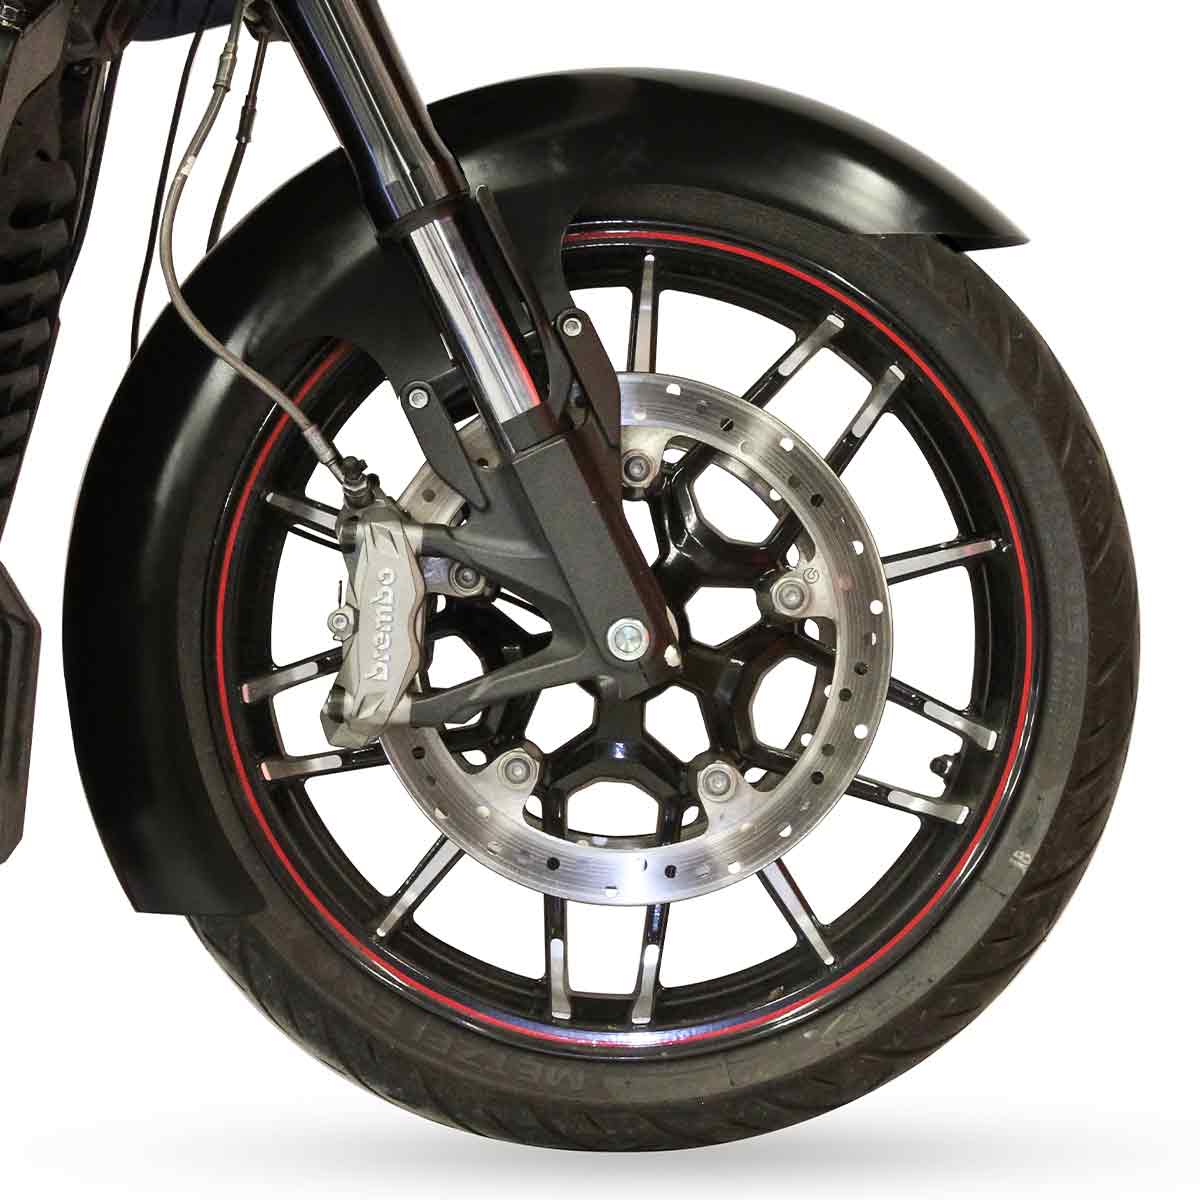 Slicer Tire Hugger Front Fenders for Indian® Challenger, Pursuit and Sport Chief Motorcycles(Slicer)